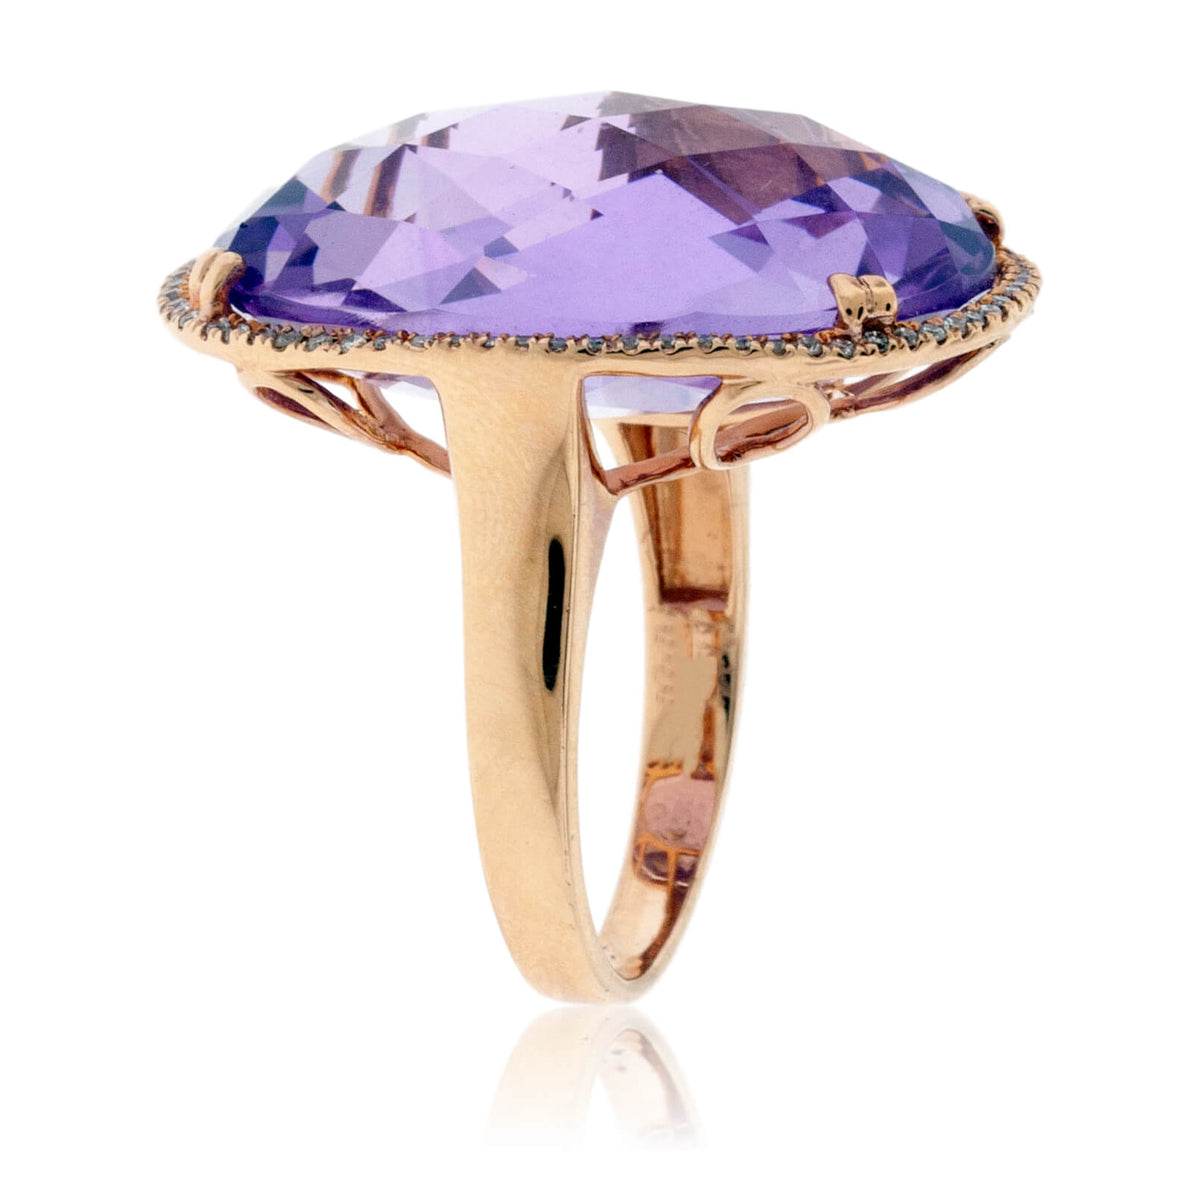 Rose Gold Oval Fancy Cut Amethyst and Diamond Ring - Park City Jewelers